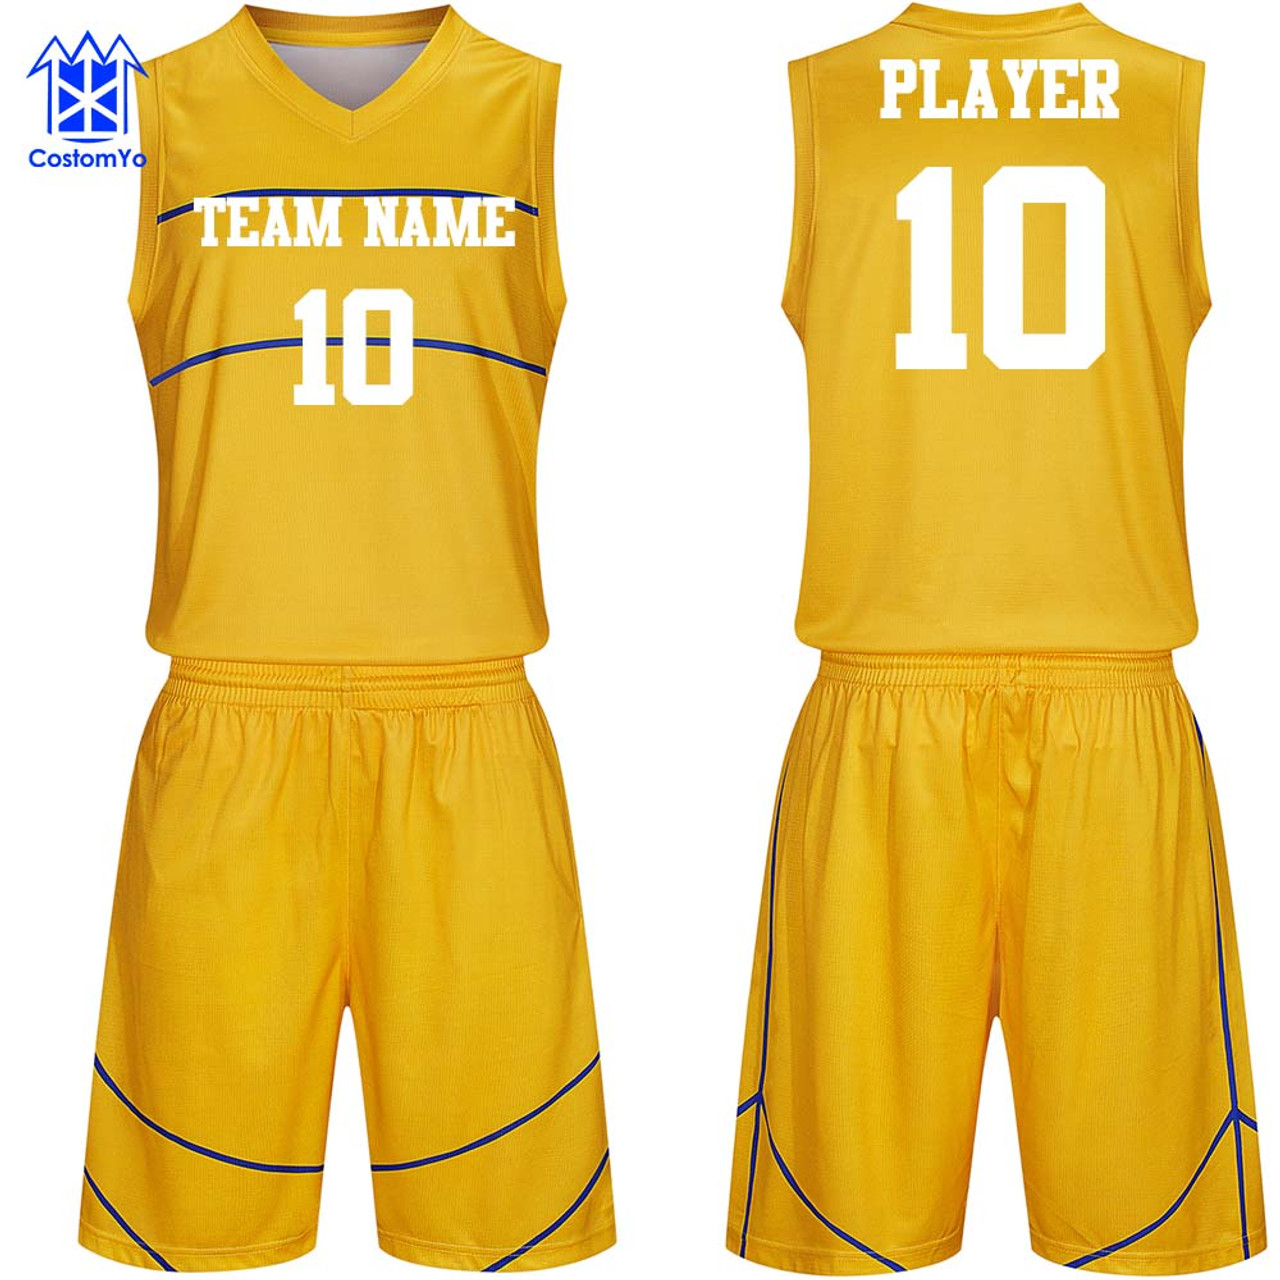 Jekasa sportswear - BESTFRIEND FOREVER Spongebob & Patrick Basketball  Jersey Want to customize these designs with your own team name? for  inquiries just drop message on us. We accept made to order